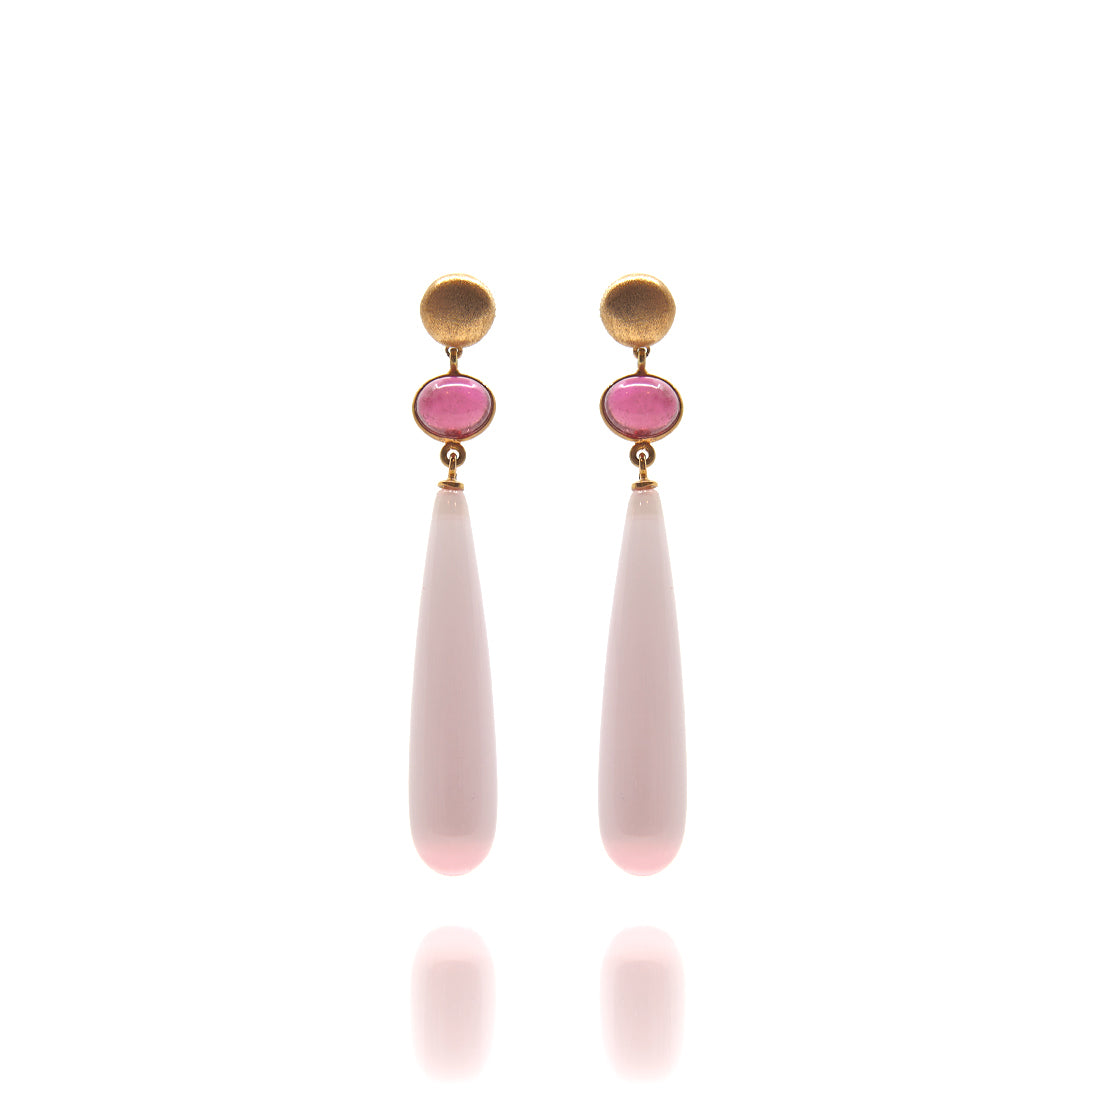 Rose gold earrings with quartz and tourmaline 